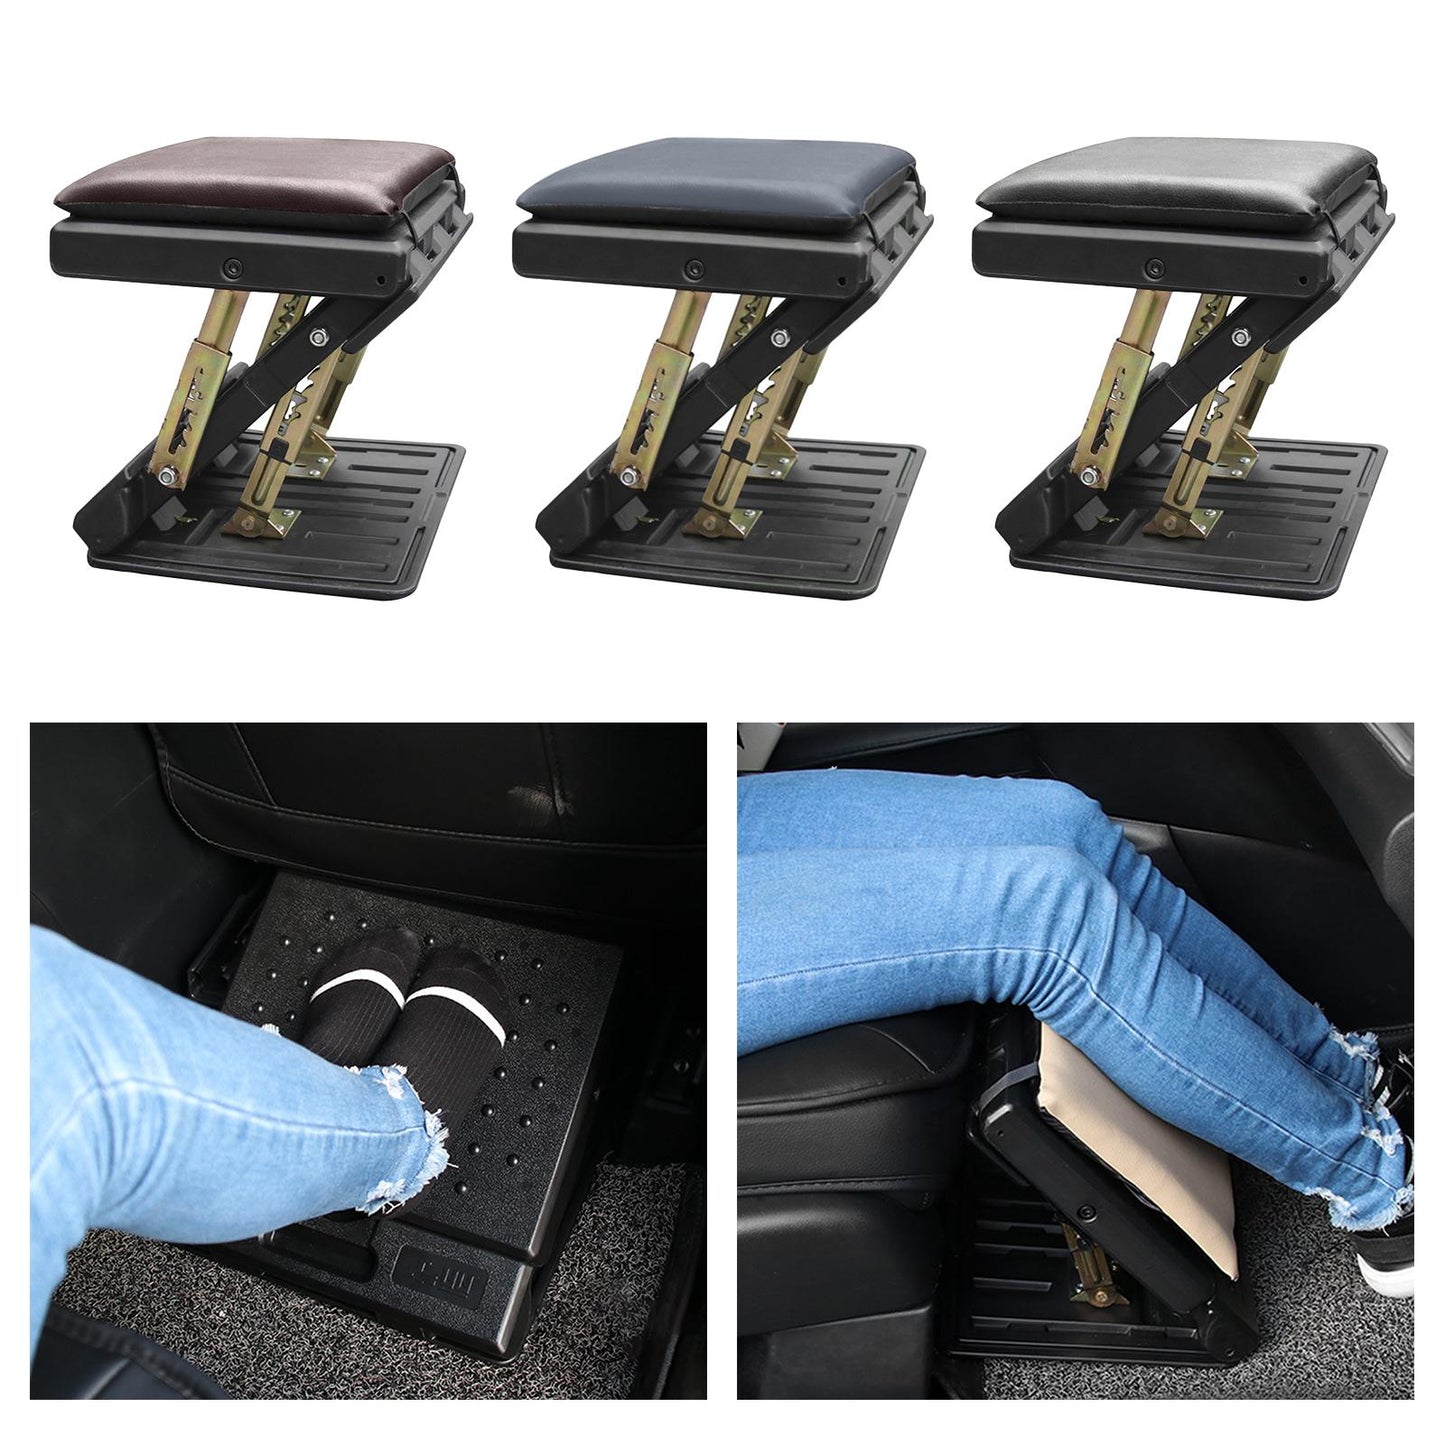 Adjustable Footrest with Maaging Beads Universal Fits for Car Under Desk